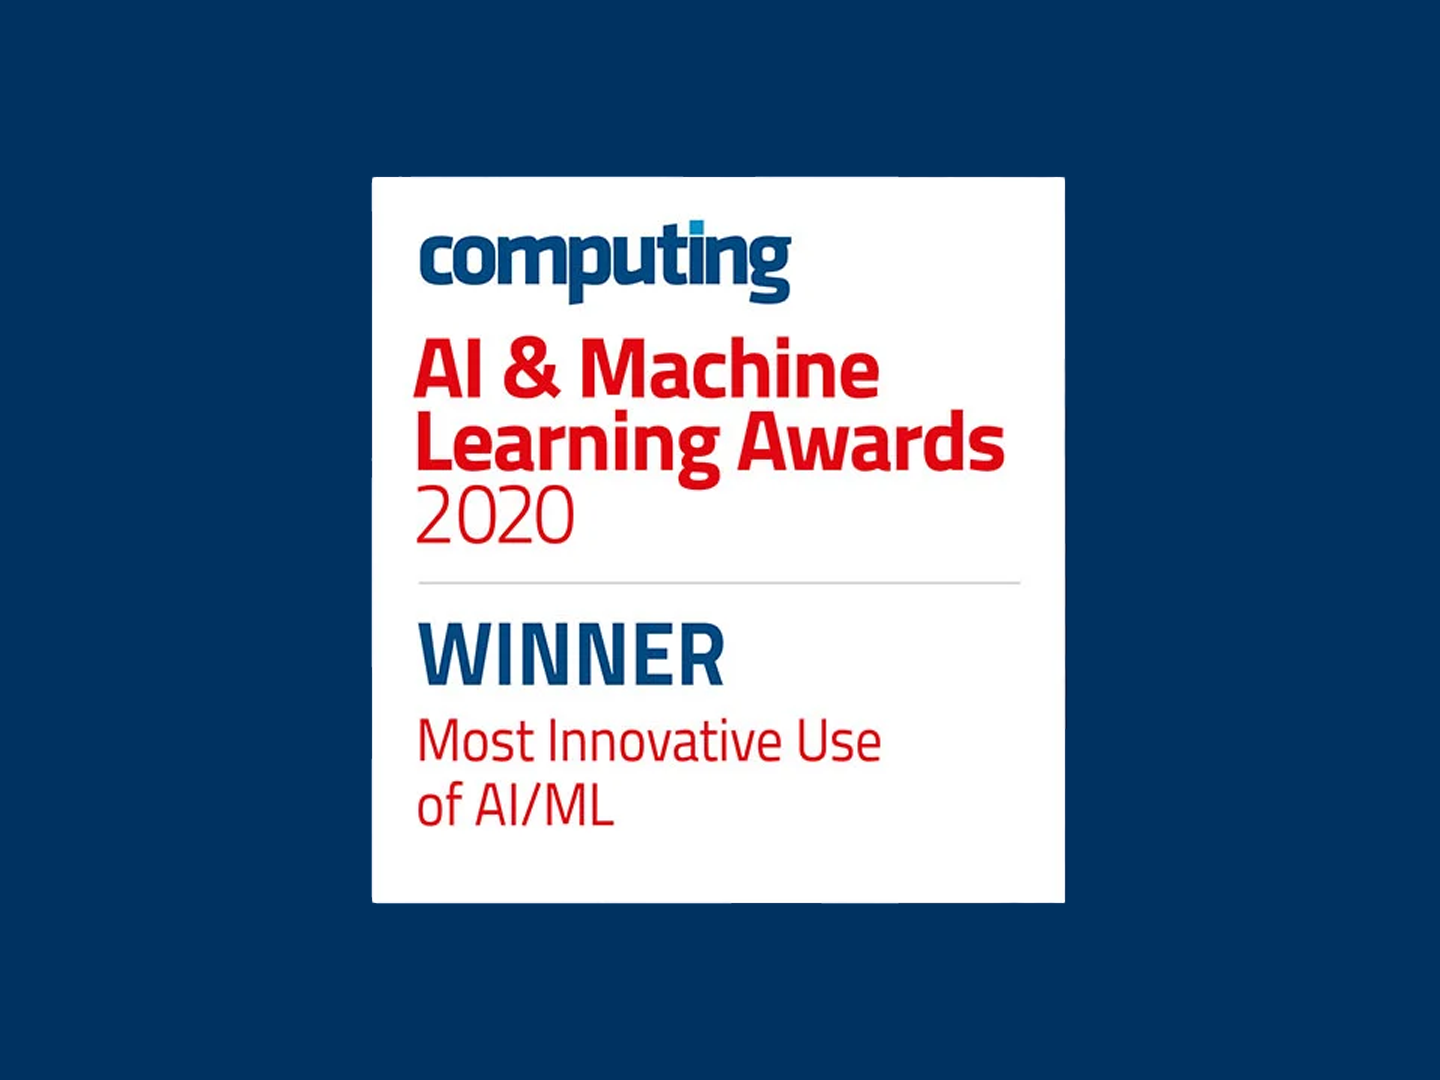 Dataminr Honored for “Most Innovative Use of AI/ML” at the 2020 AI and Machine Learning Awards